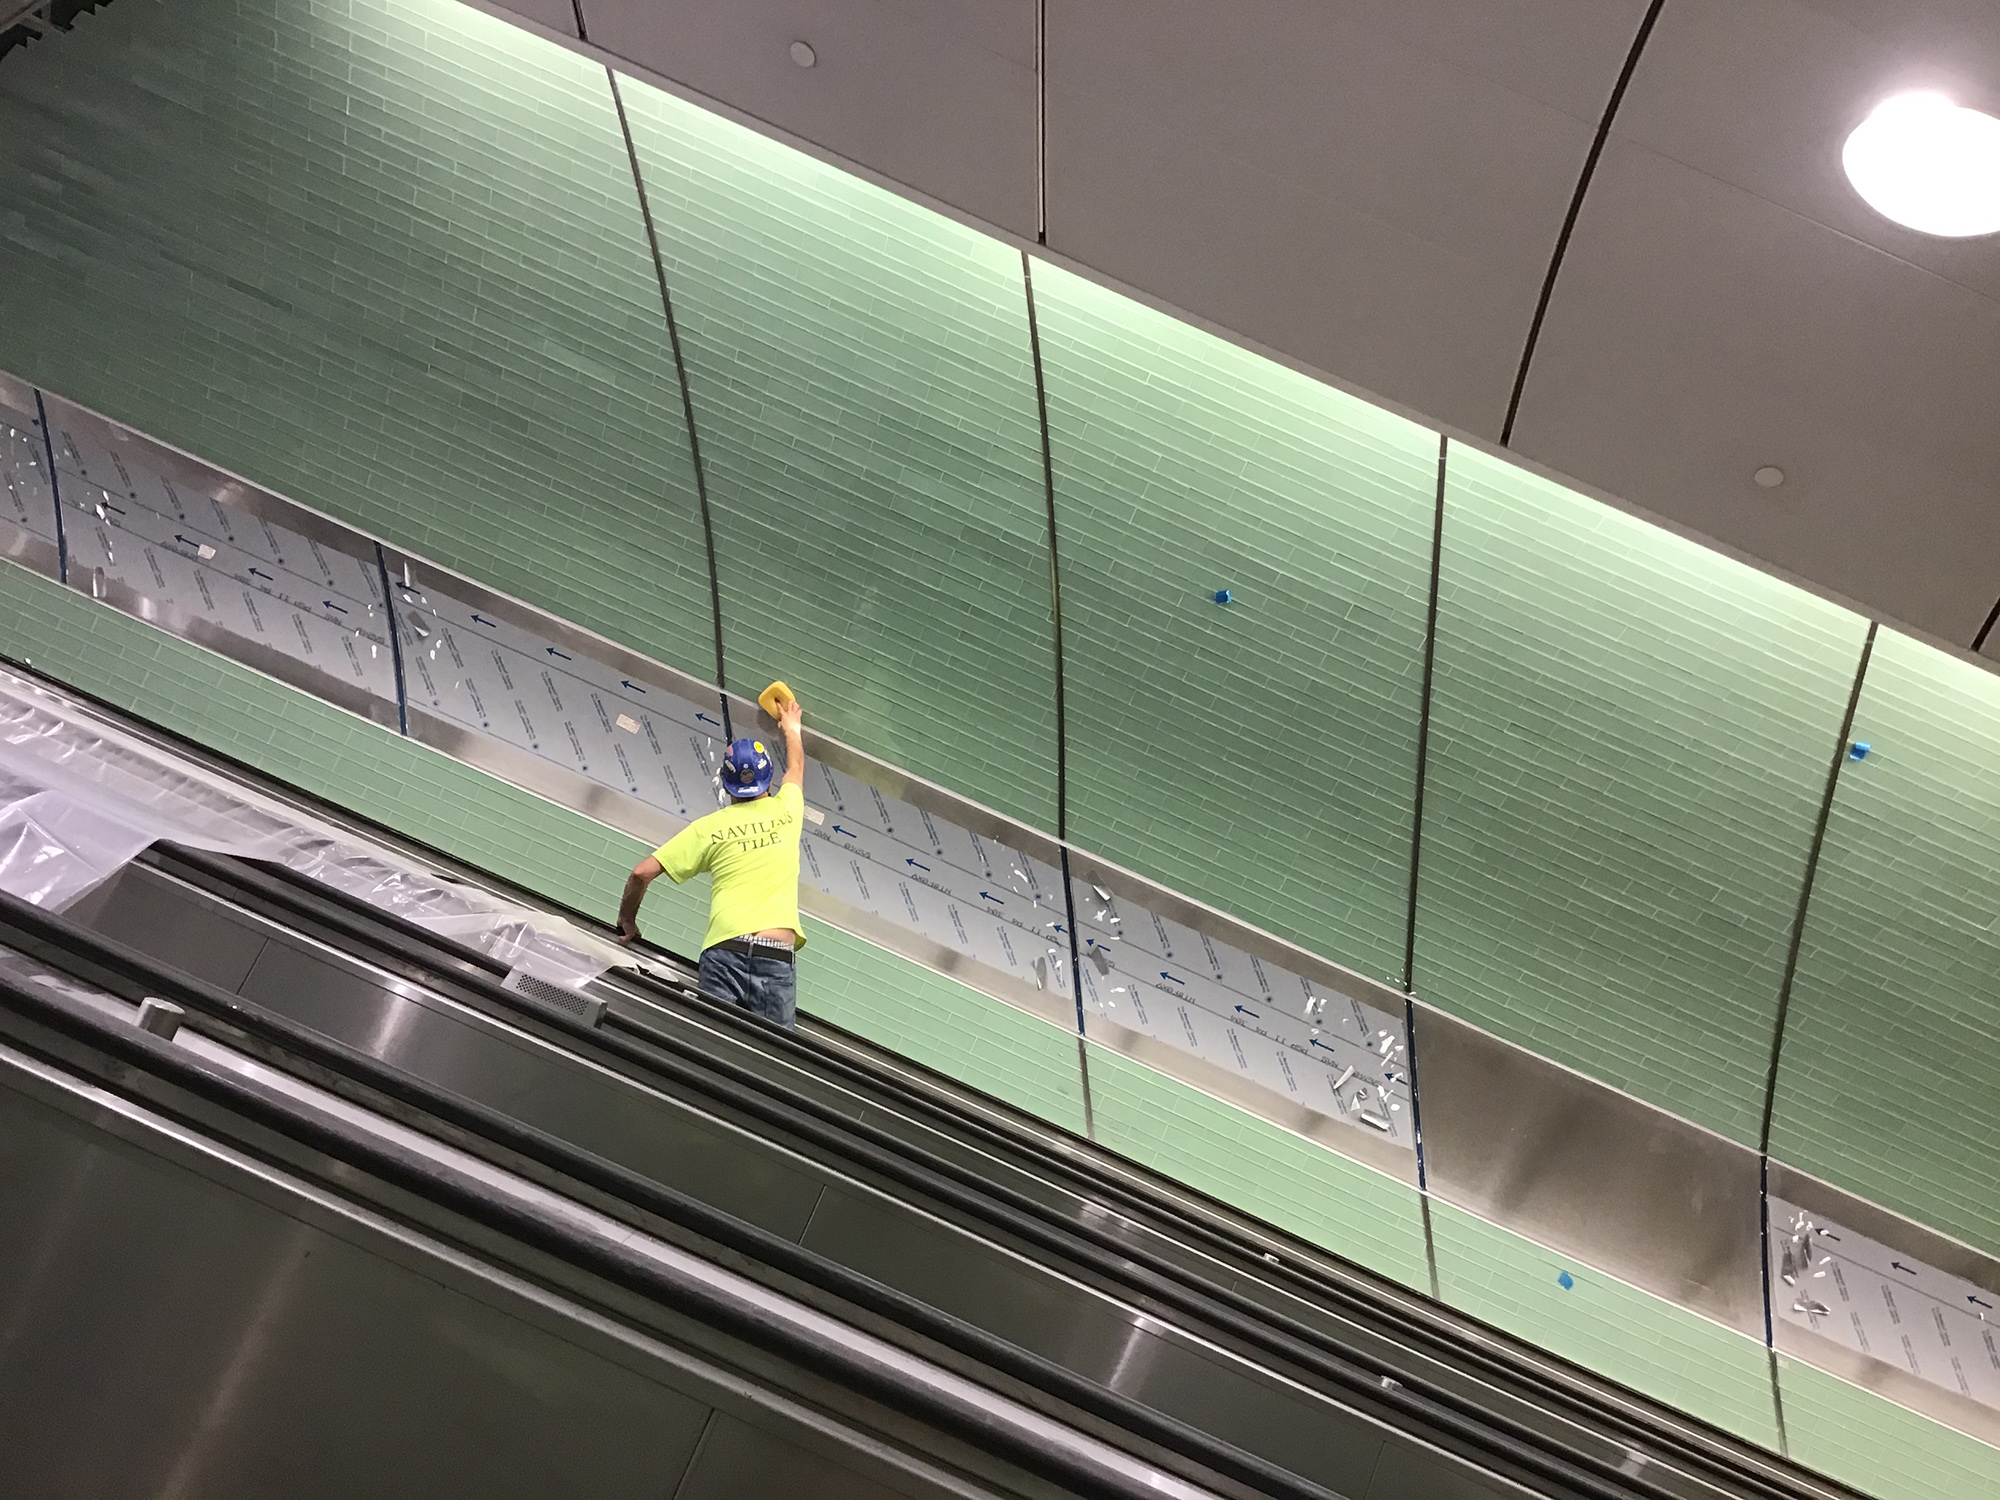 Applying grout to glass tiles in escalator wellway, 2020